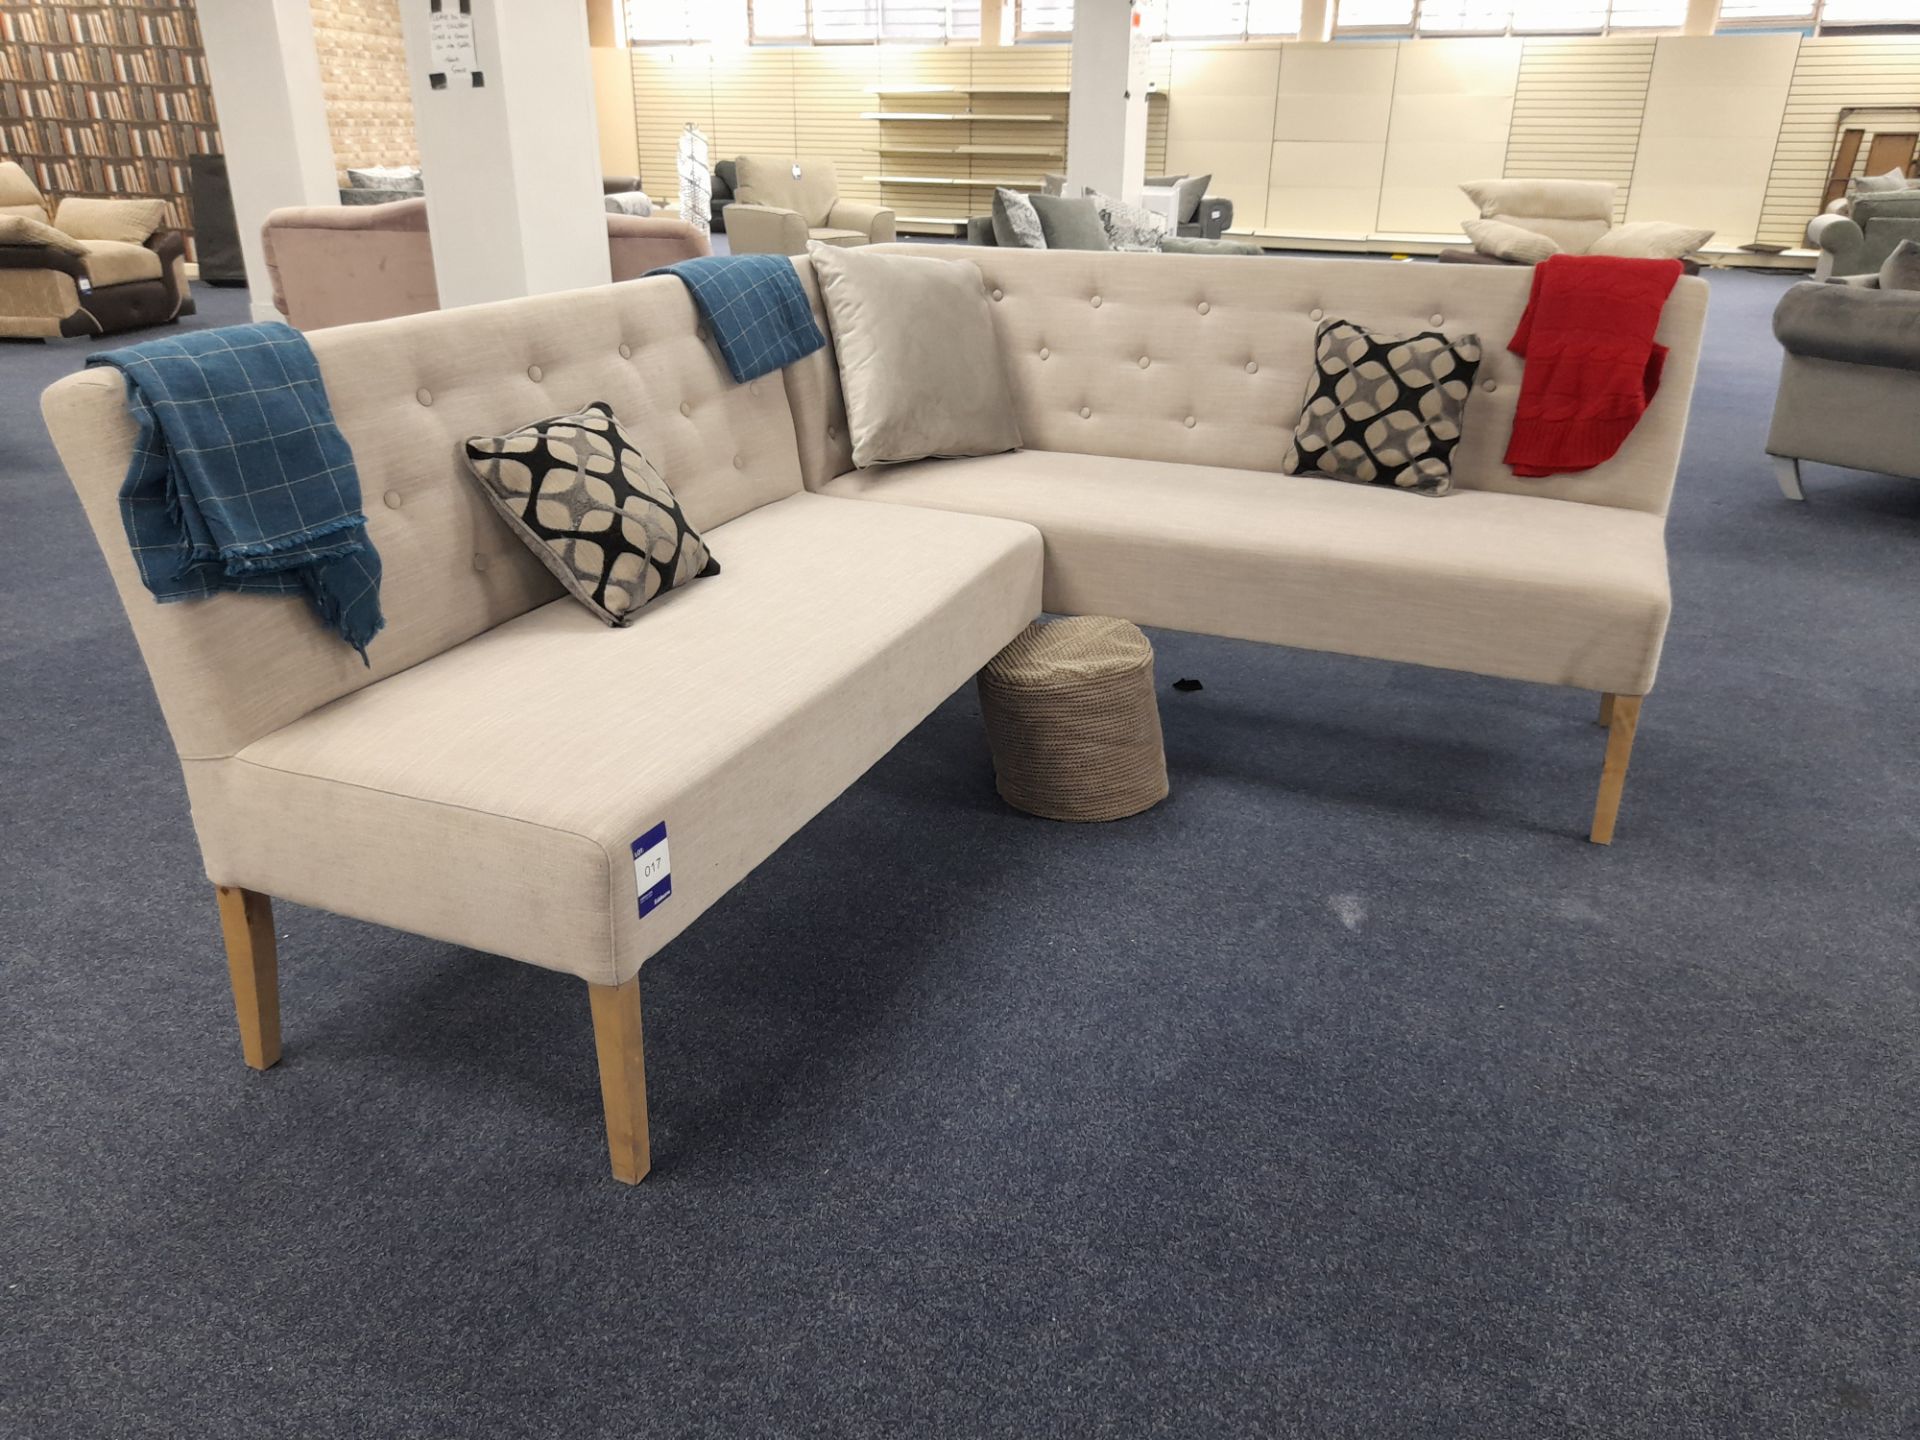 Two section/5 seat cream fabric upholstered bench type corner seating unit (Ex Display) - Image 6 of 6